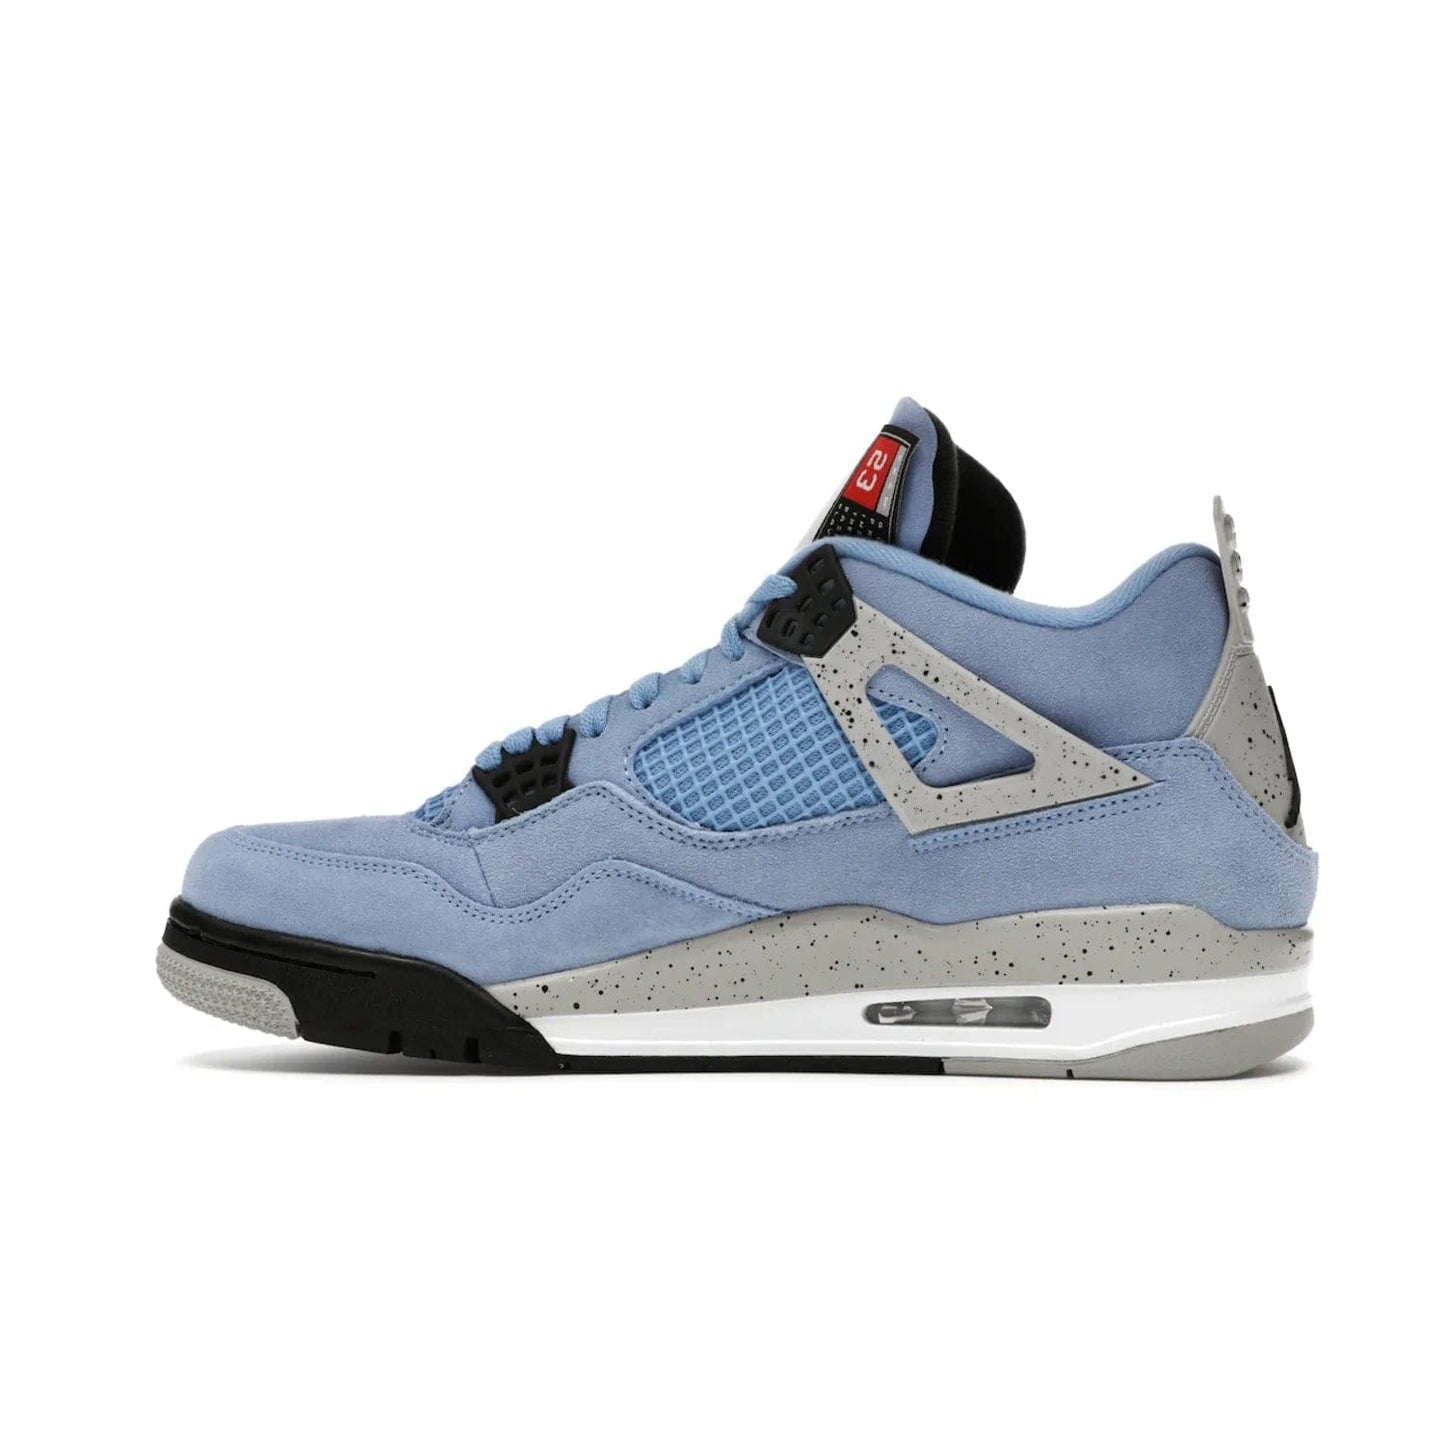 Jordan 4 Retro University Blue - Image 20 - Only at www.BallersClubKickz.com - The Air Jordan 4 University Blue honors MJ's alma mater. Rich University Blue suede, panels of netting, and Cement Grey speckled eyelets give this design an edgy look. Features a black, white and Tech Grey sole with a clear Air unit and two woven labels on the tongue. Jumpman logo & Team Jordan jock tag included. Released April 2021.